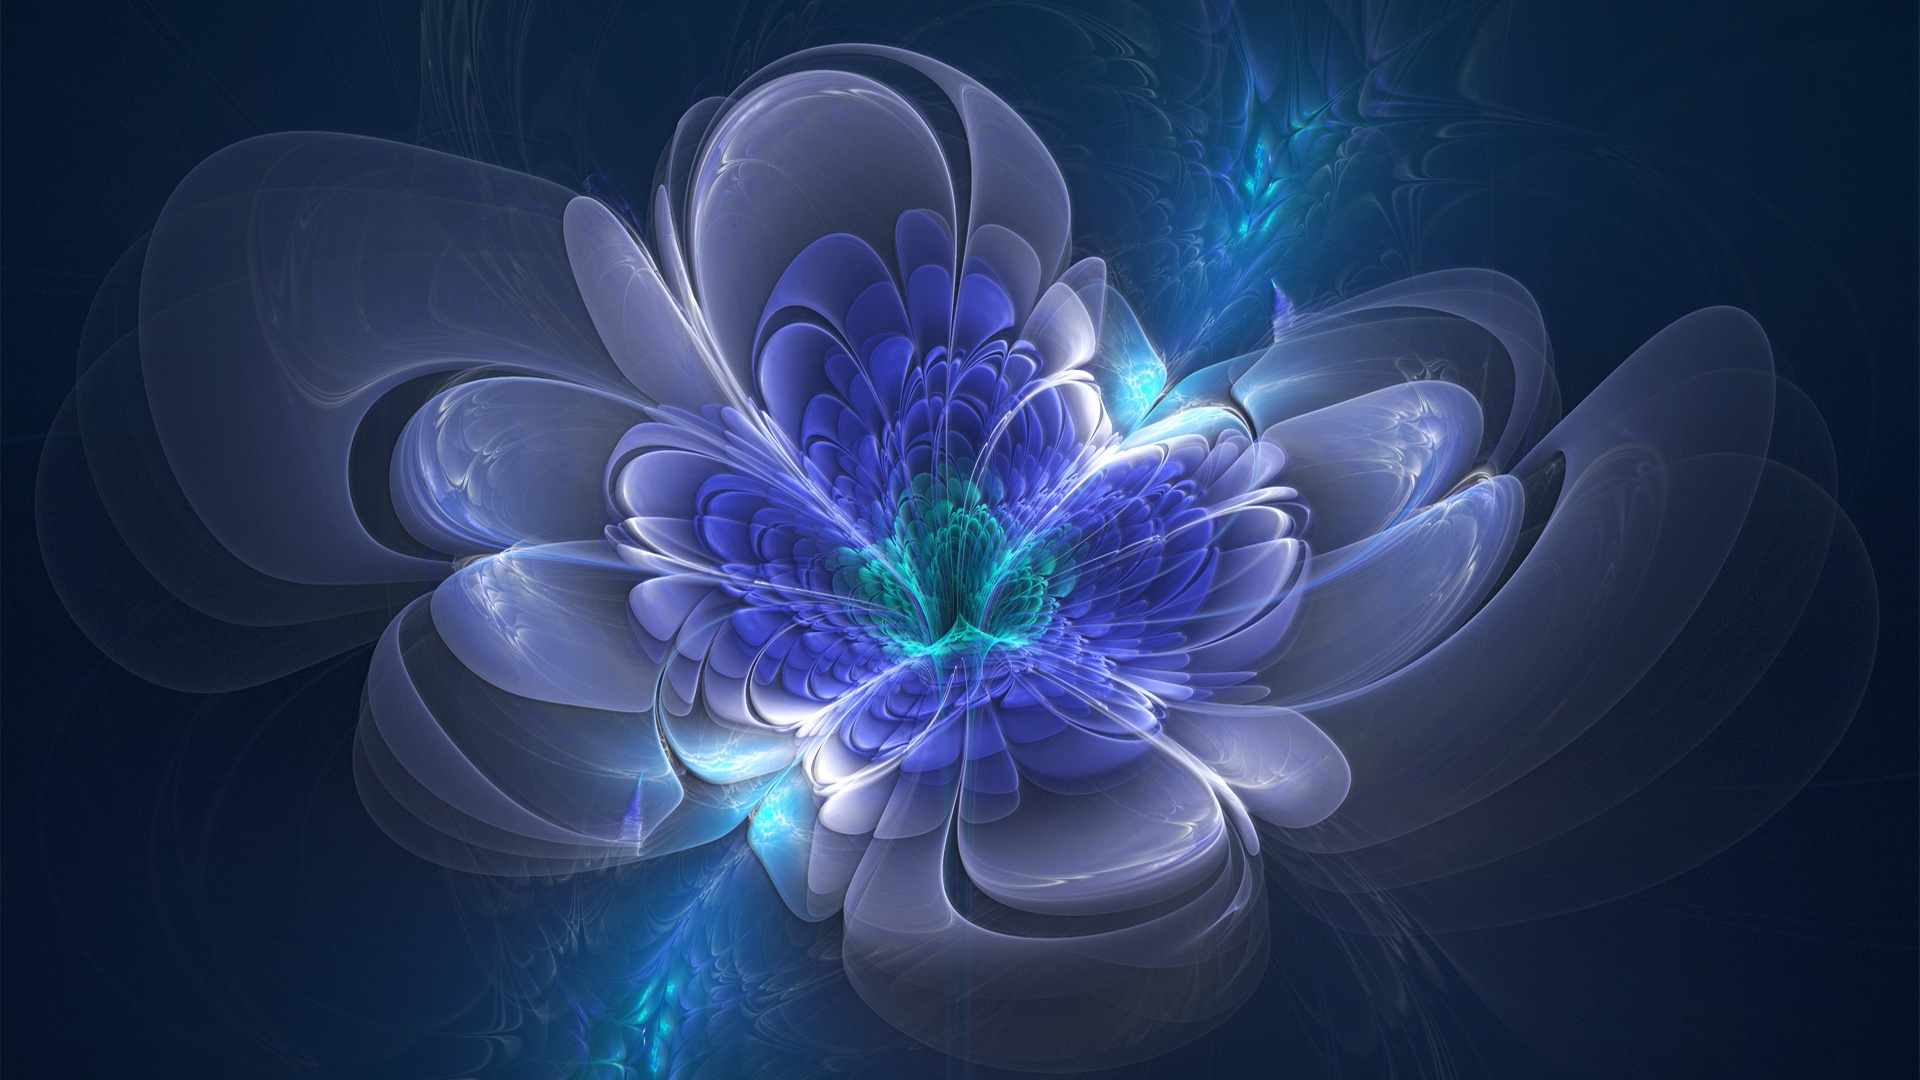 Beautiful Fractal for 1920 x 1080 HDTV 1080p resolution